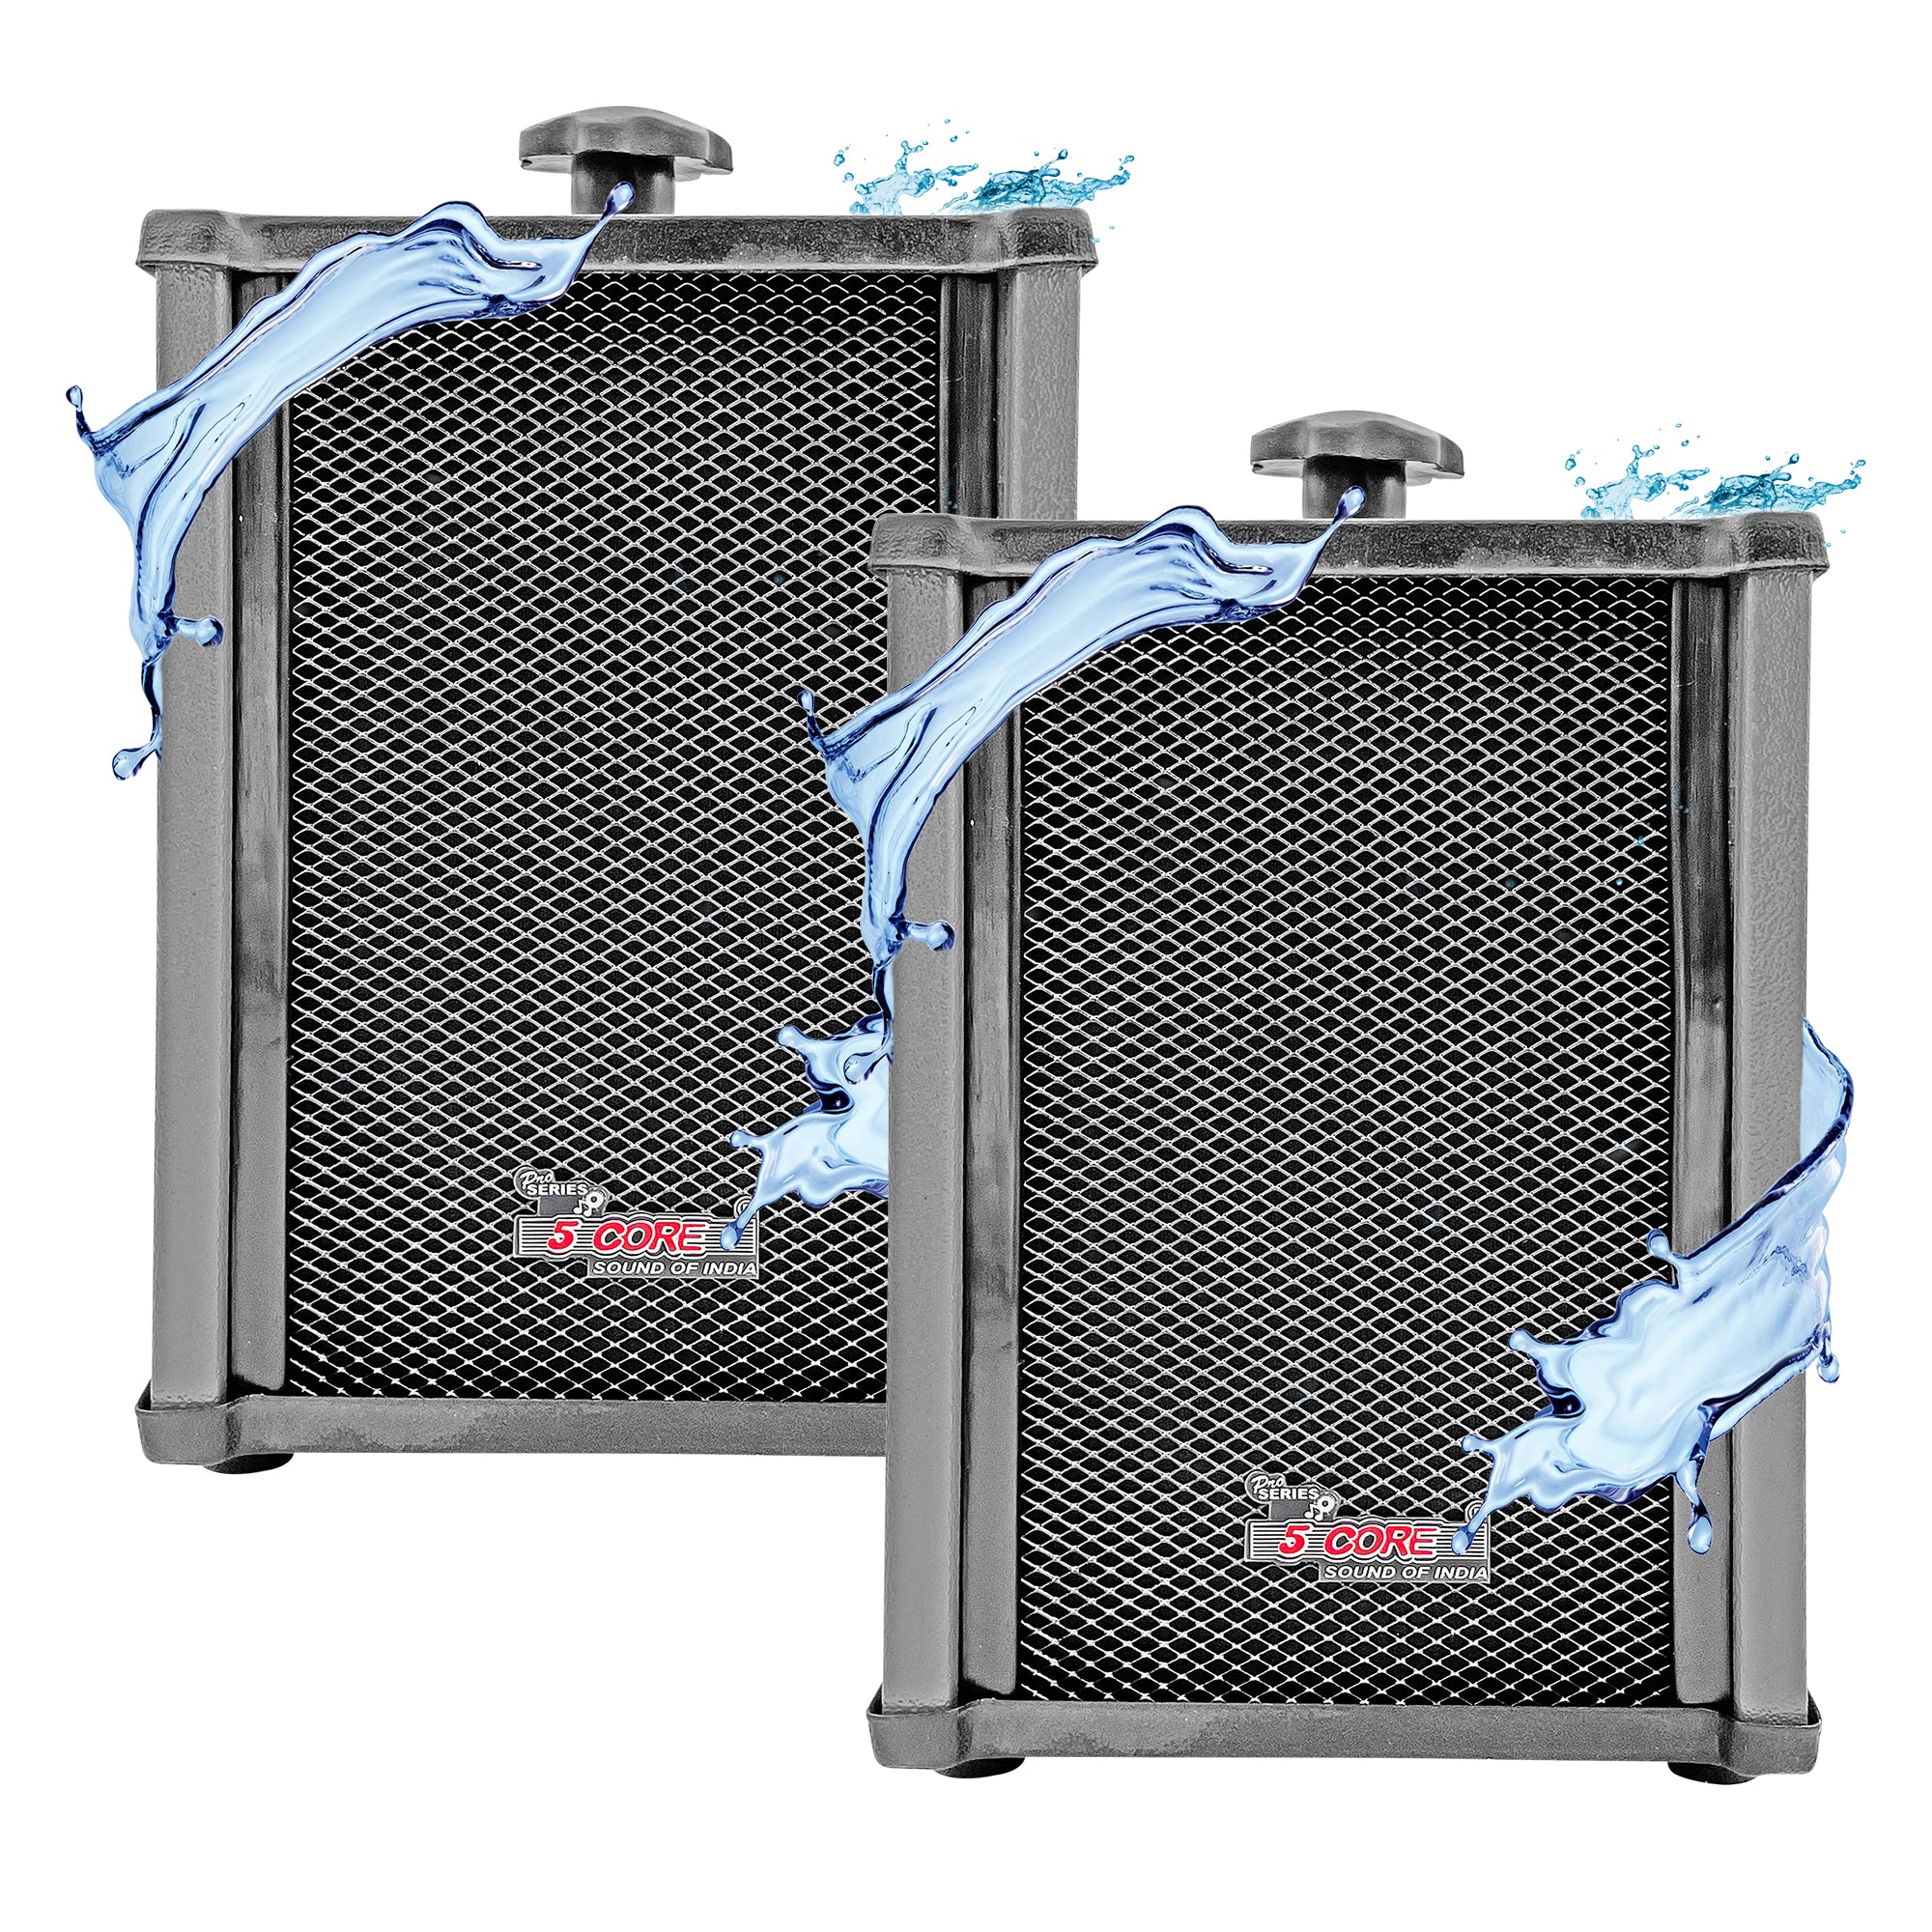 5 CORE 6x4 Inch In Wall Speaker Pair High Performance 10 Watt Outdoor Indoor Speaker with Effortless Mounting Swivel | All Weather Resistance | Stereo Sound for Home Theatre, Patio, Garden Grey 10T G 2PCS